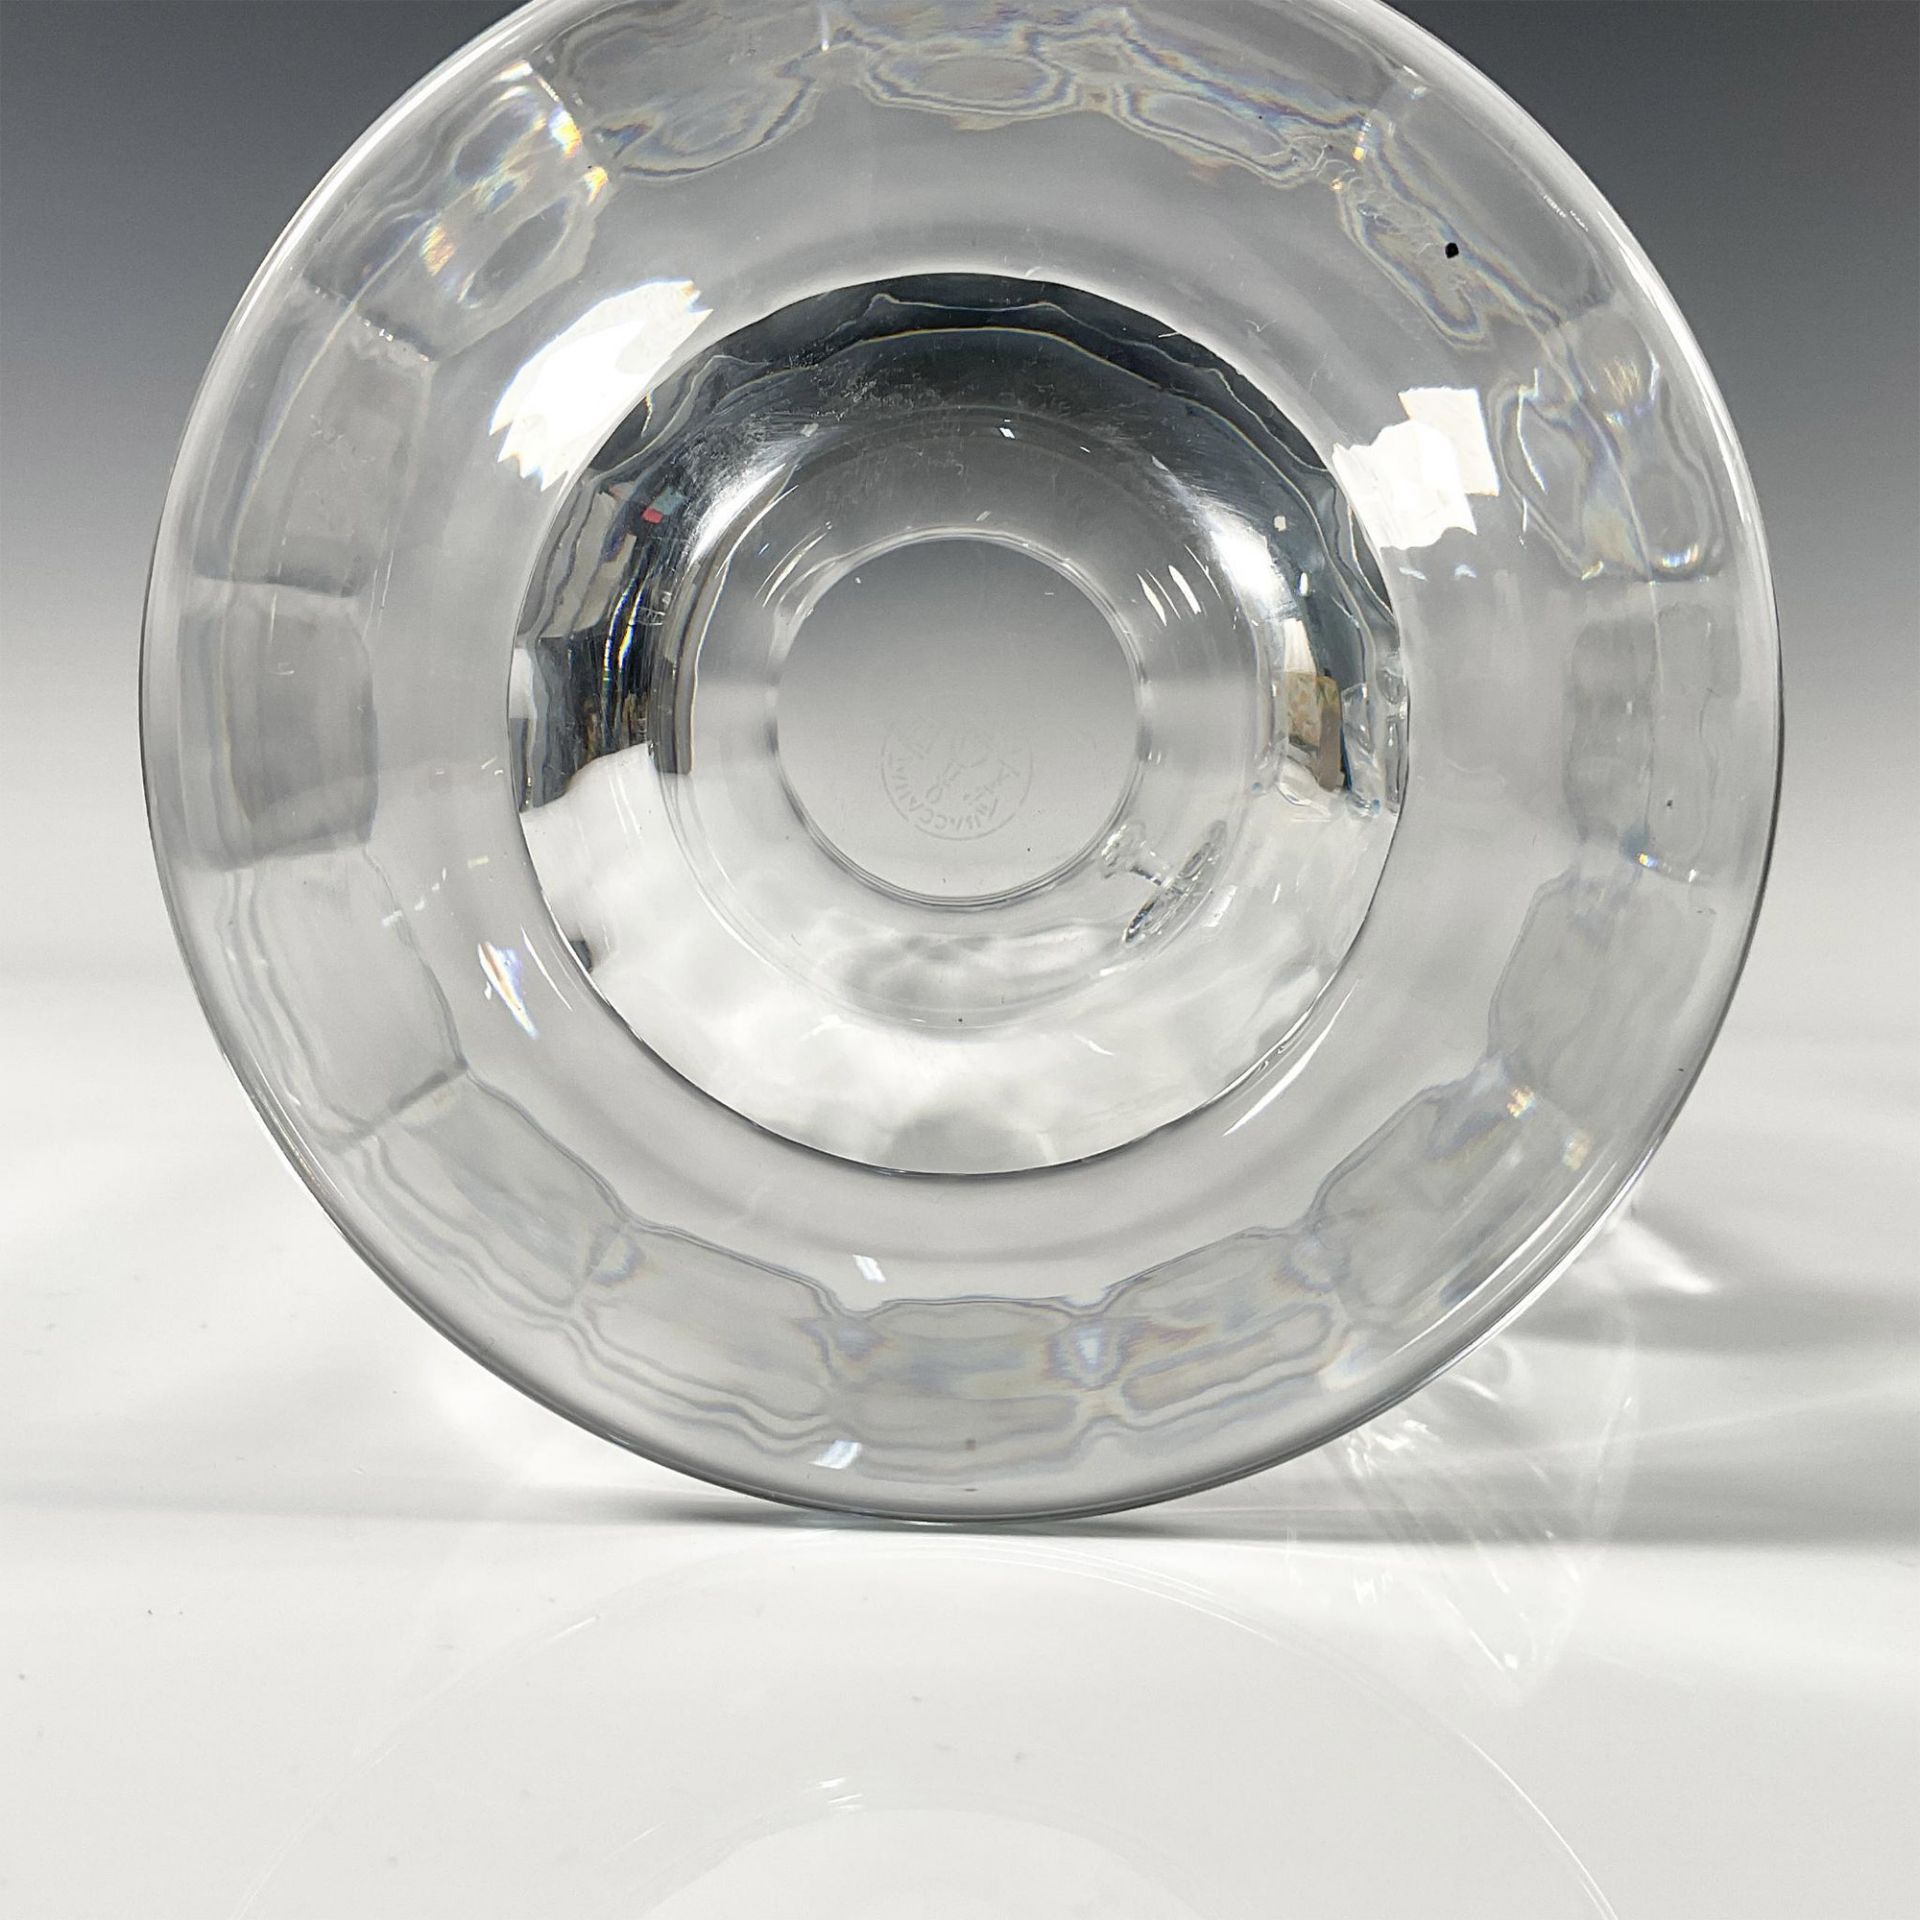 Baccarat Crystal Pitcher - Image 4 of 4